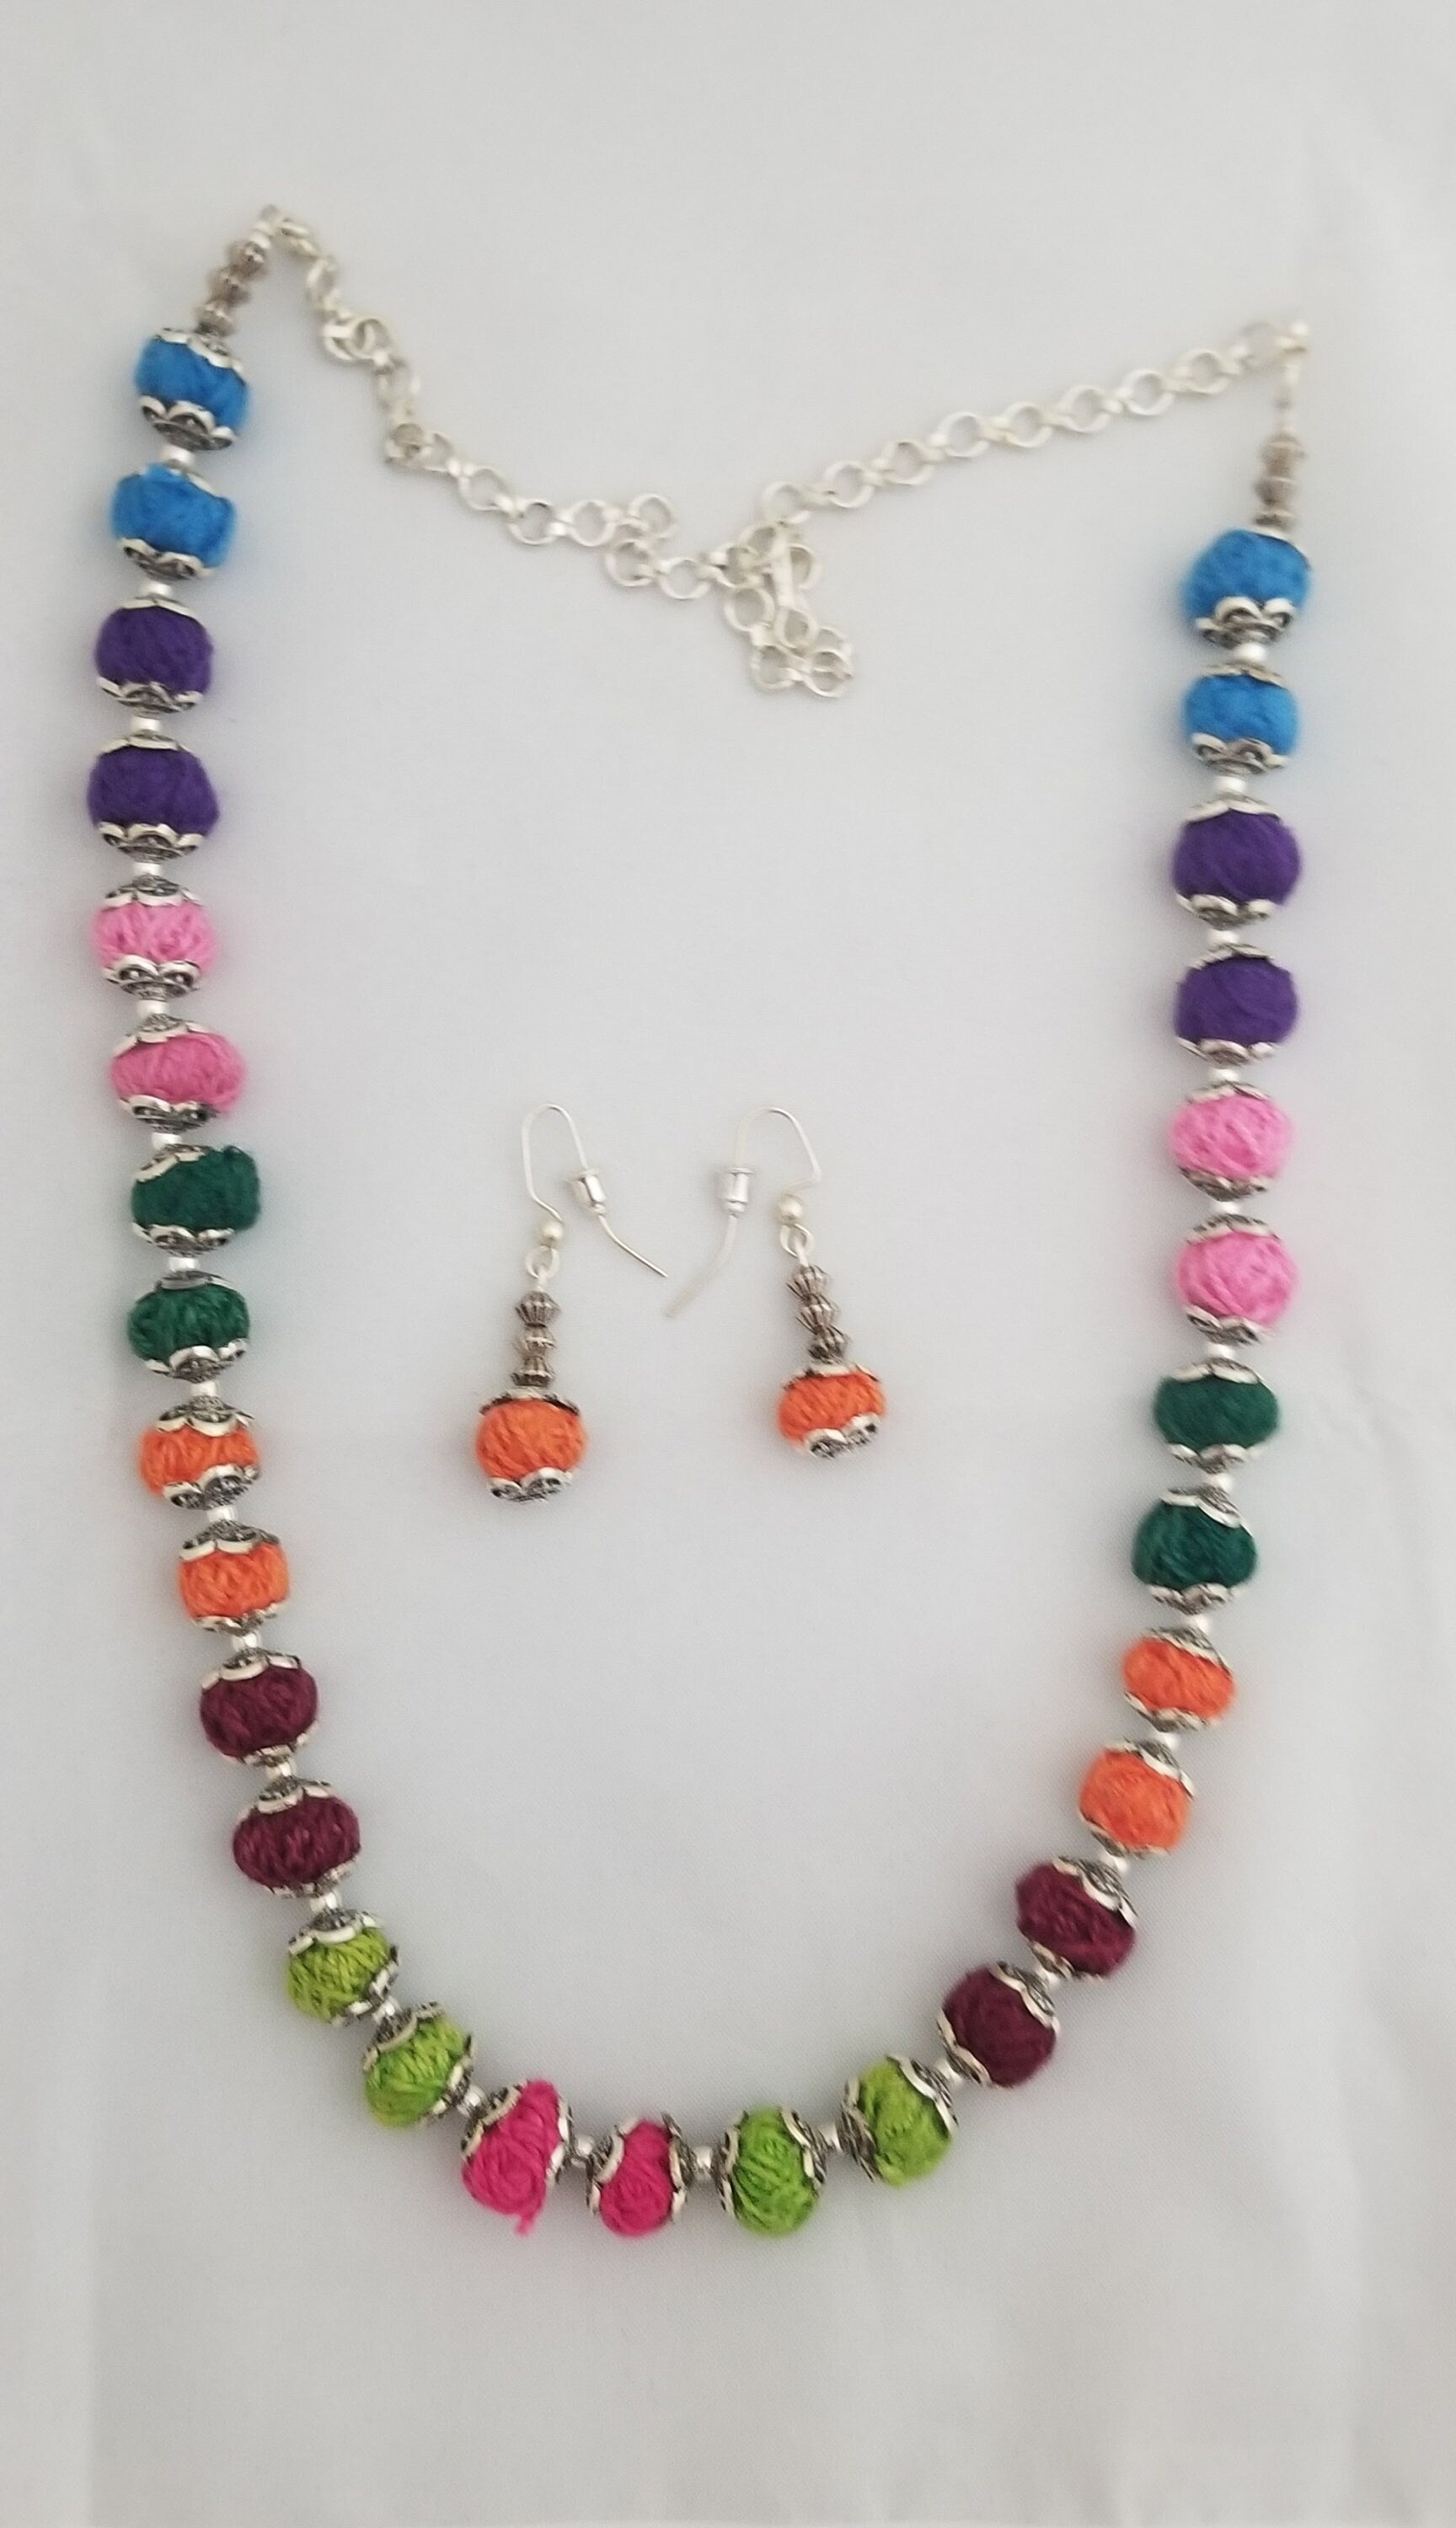 Multi-color thread beads chain with Earrings